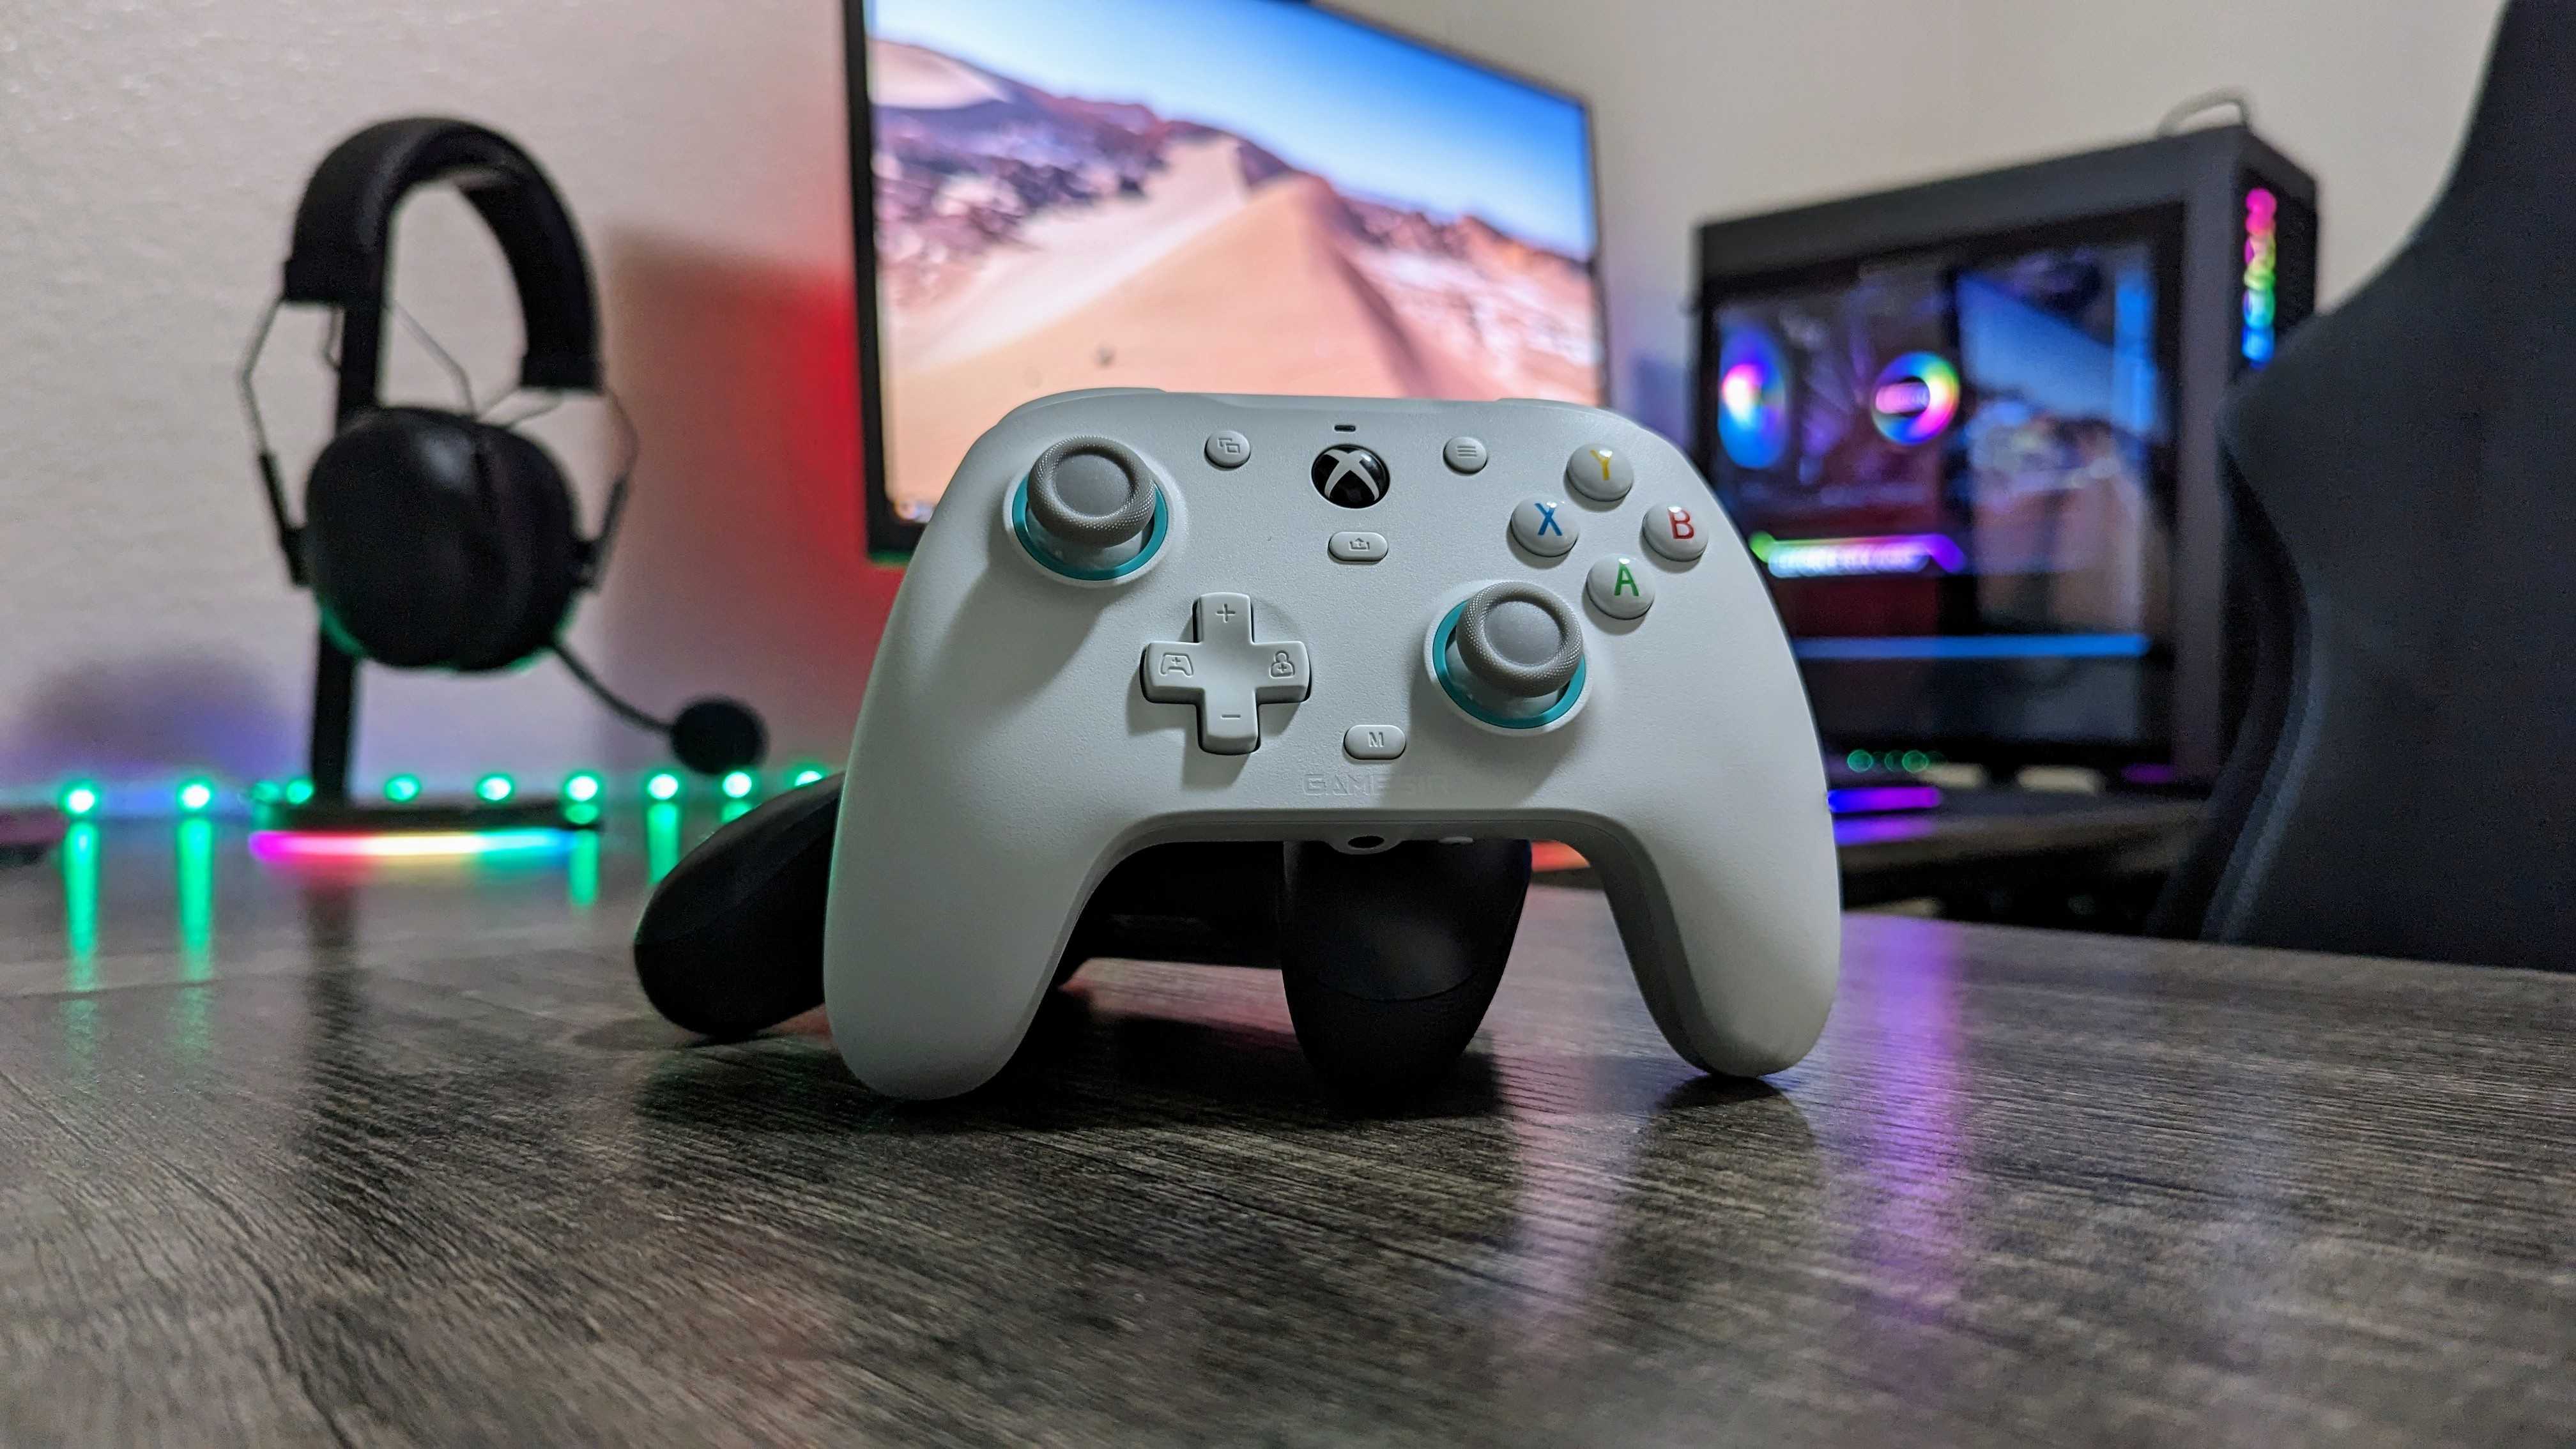 GameSir G7 review: beats Xbox at its own game